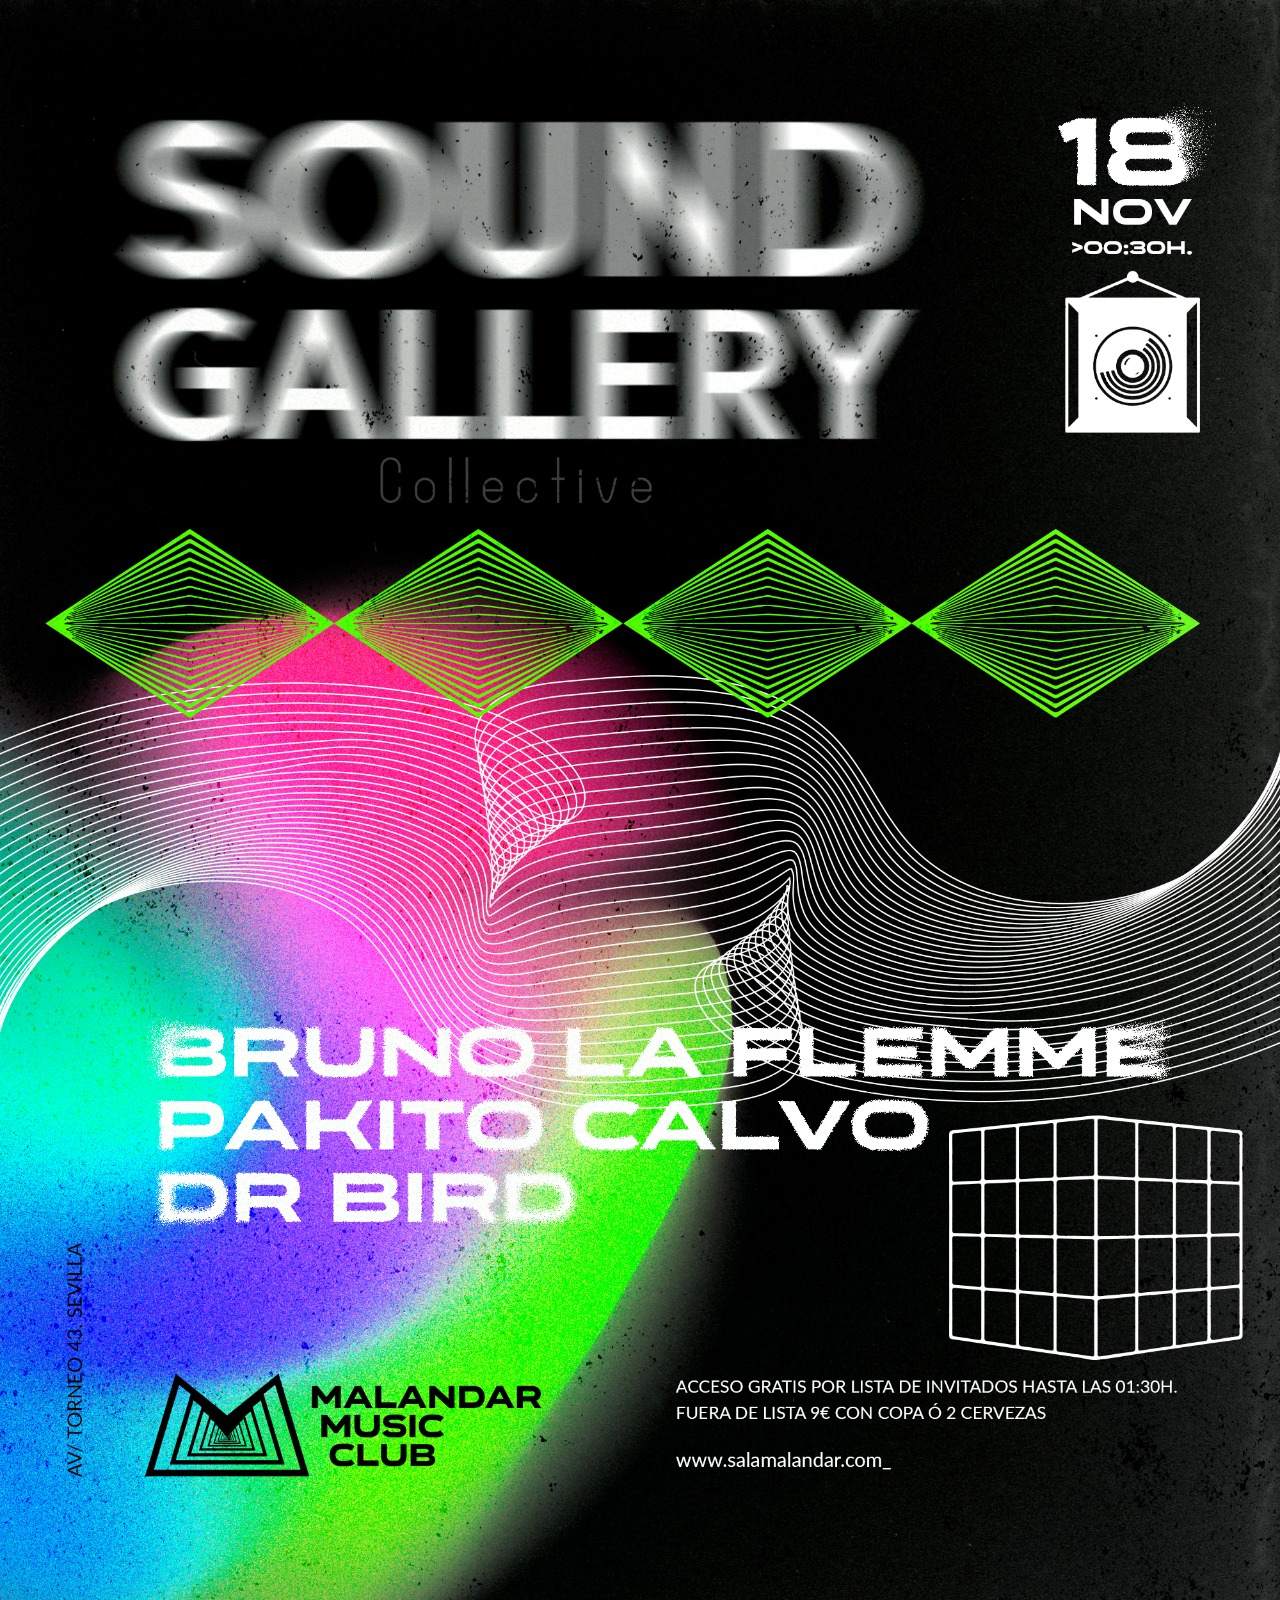 Sound gallery collective - フライヤー表